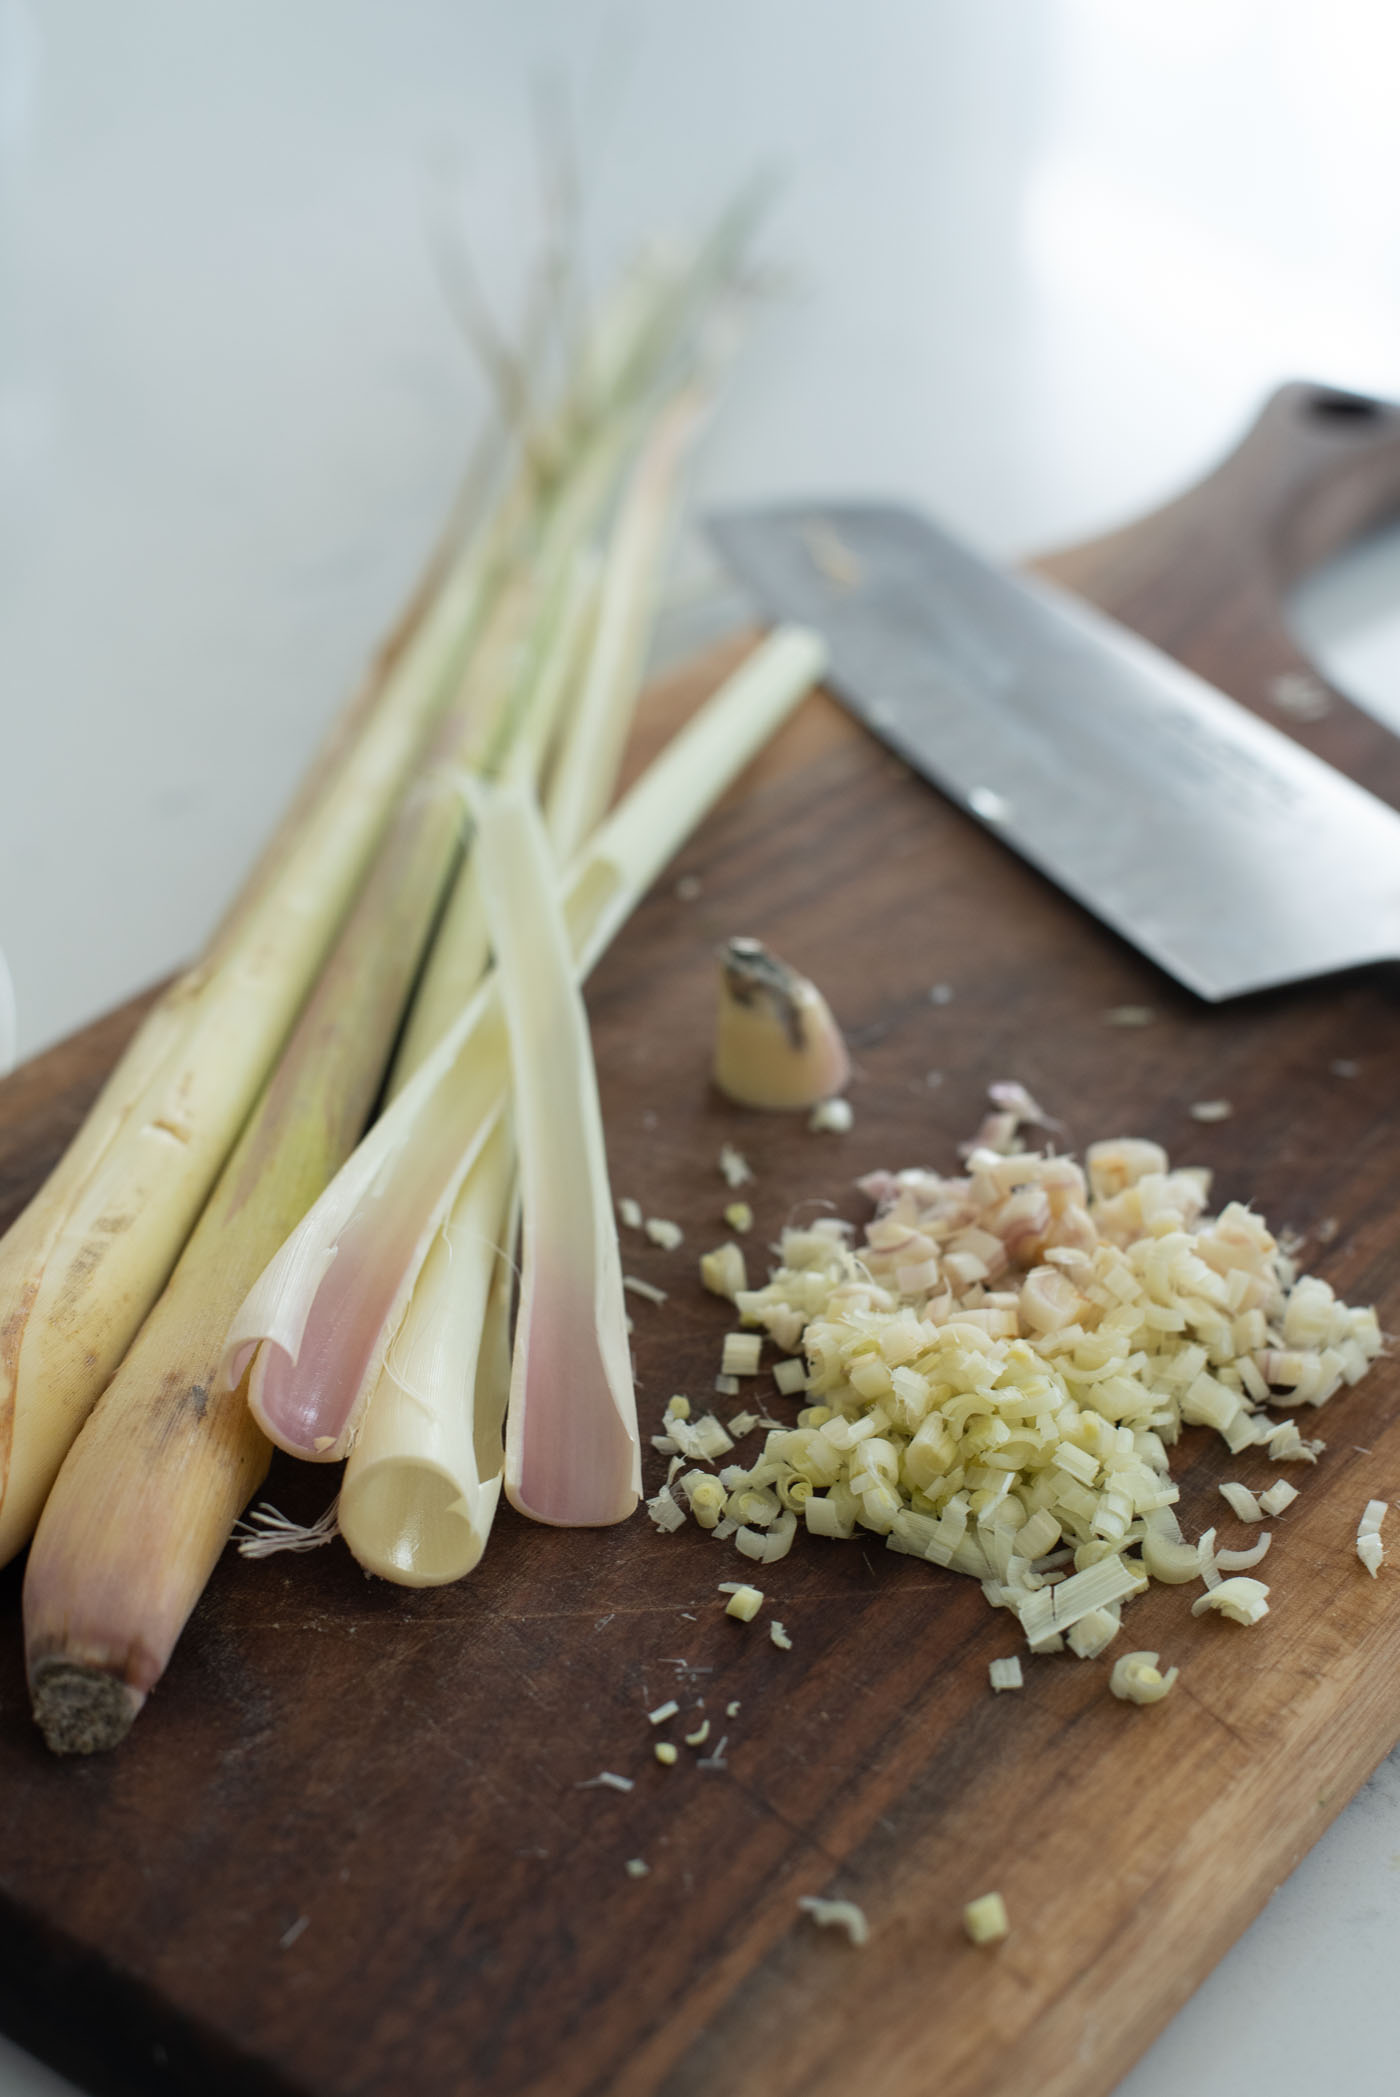 Outer layers of lemongrass are peeled off and the white core part is finely minced